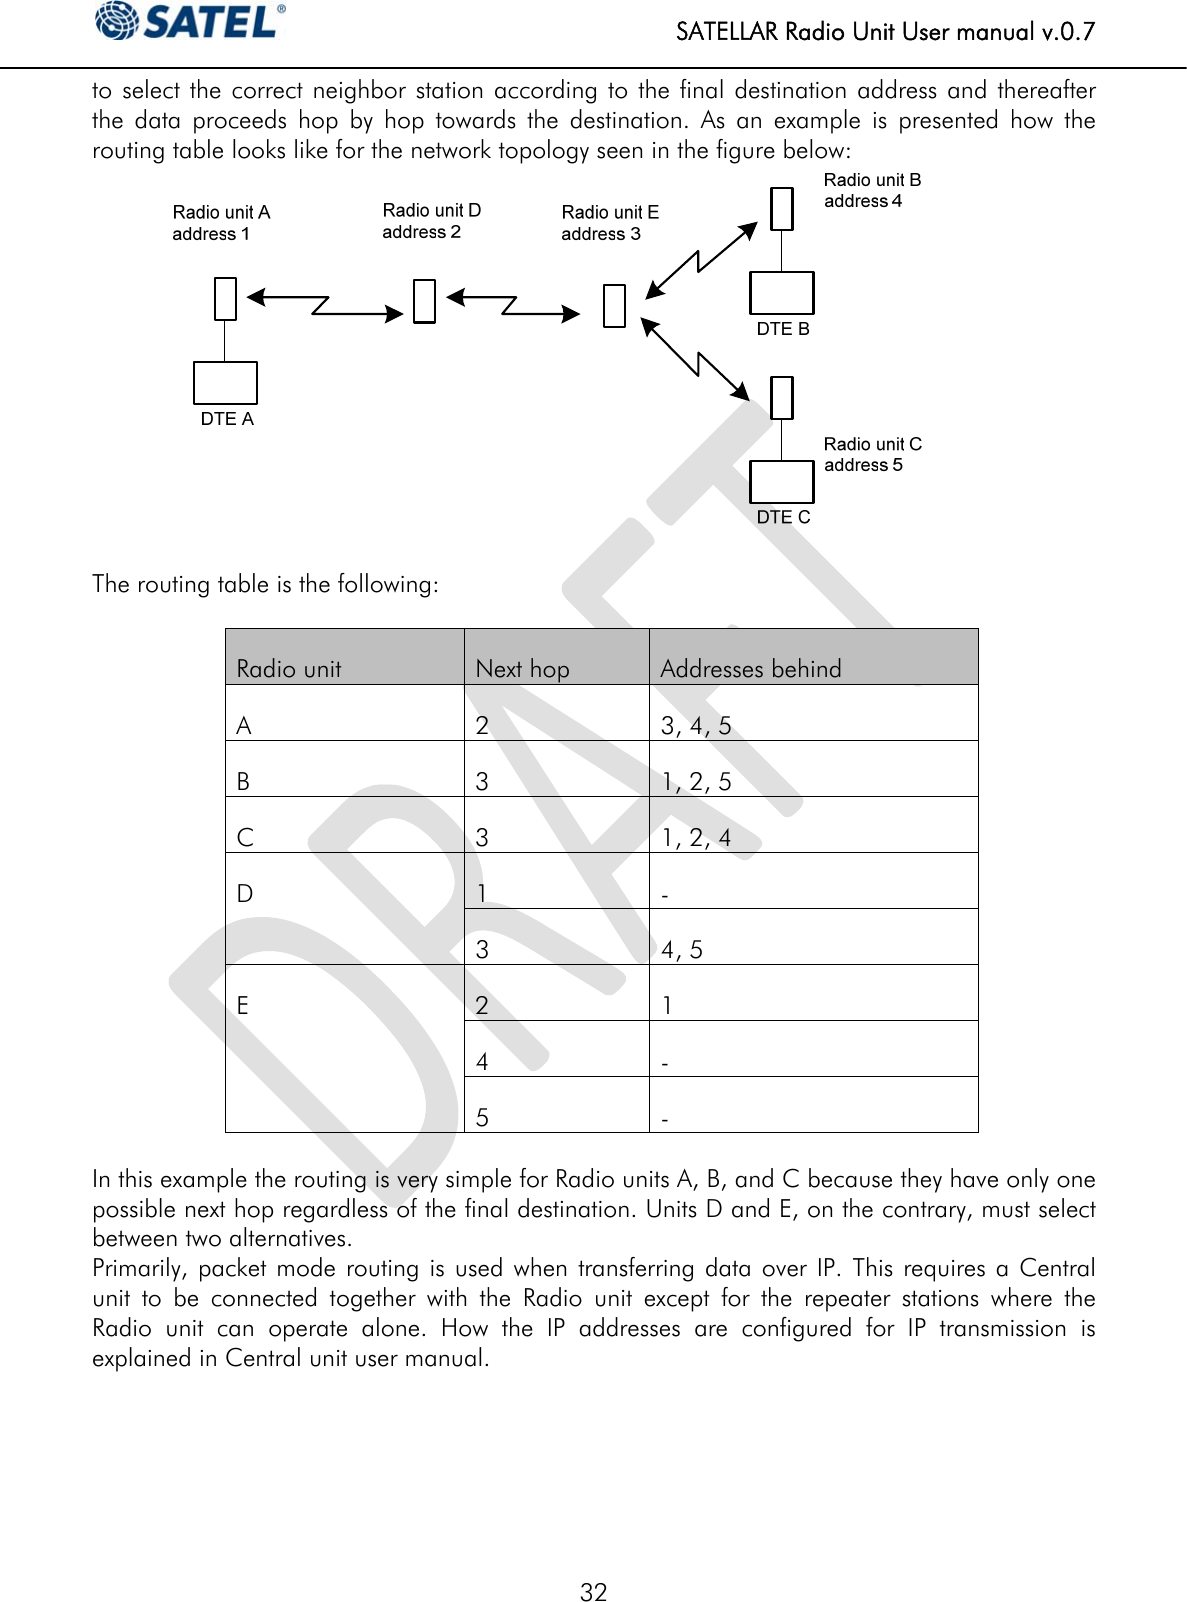   SATELLAR Radio Unit User manual v.0.7  32 to select the correct neighbor station according to the final destination address and thereafter the data proceeds hop by hop towards the destination. As an example is presented how the routing table looks like for the network topology seen in the figure below:   The routing table is the following:  Radio unit   Next hop  Addresses behind A  2  3, 4, 5 B  3  1, 2, 5 C  3  1, 2, 4 D 1 - 3 4, 5 E 2 1 4 - 5 -  In this example the routing is very simple for Radio units A, B, and C because they have only one possible next hop regardless of the final destination. Units D and E, on the contrary, must select between two alternatives.  Primarily, packet mode routing is used when transferring data over IP. This requires a Central unit to be connected together with the Radio unit except for the repeater stations where the Radio unit can operate alone. How the IP addresses are configured for IP transmission is explained in Central unit user manual.      